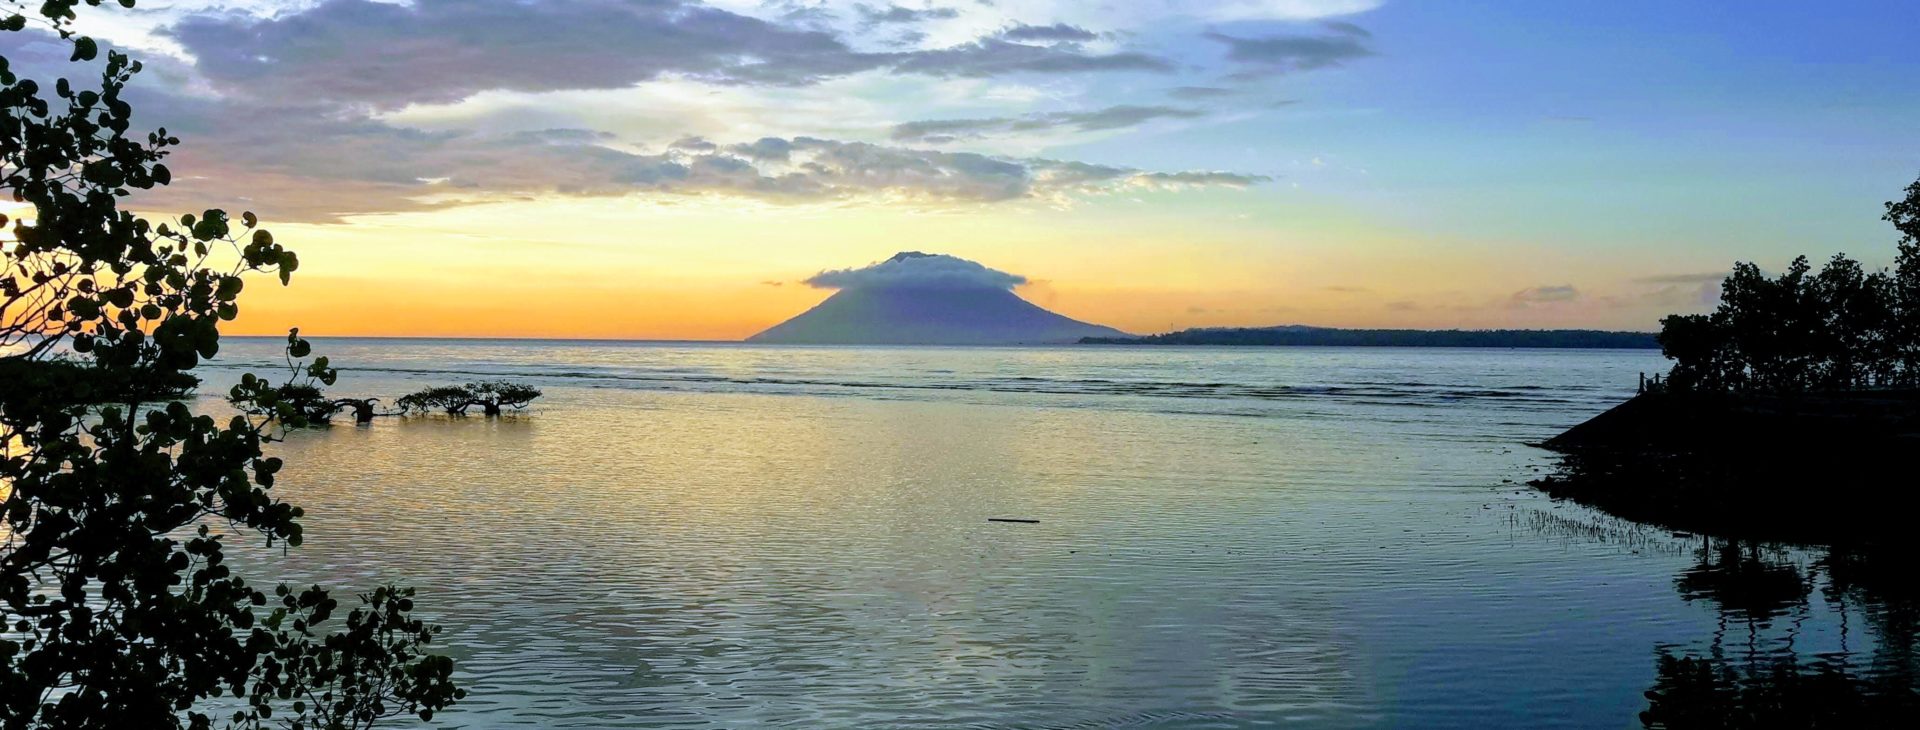 Experience the beauty of North-Sulawesi